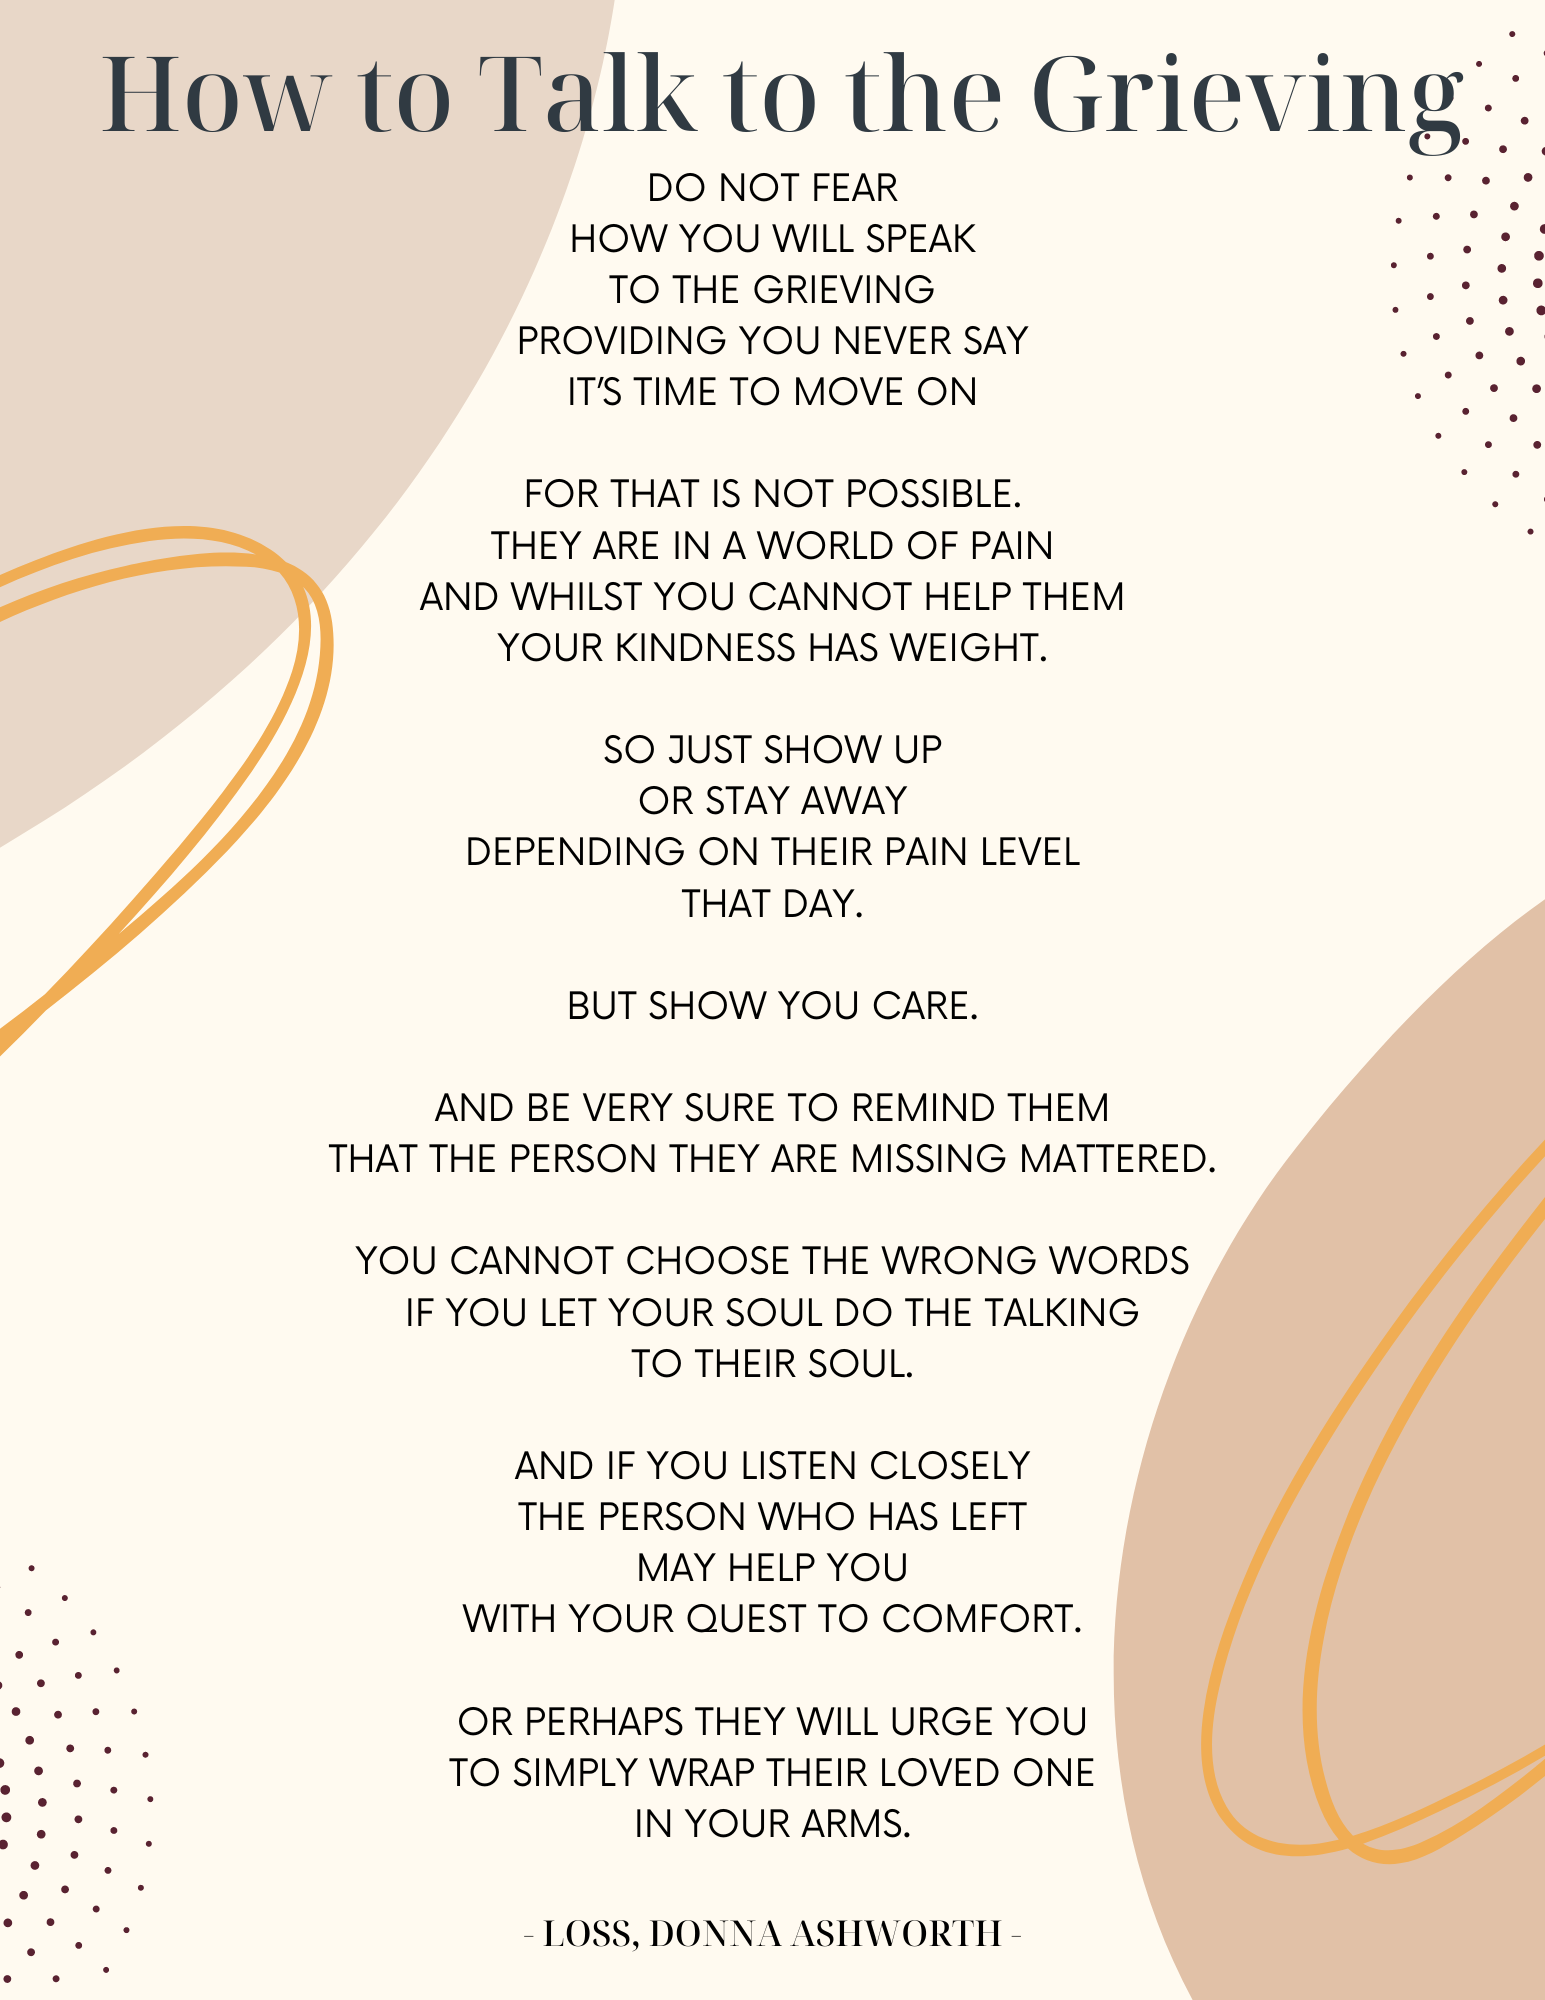 How to Talk to the Grieving - Poem